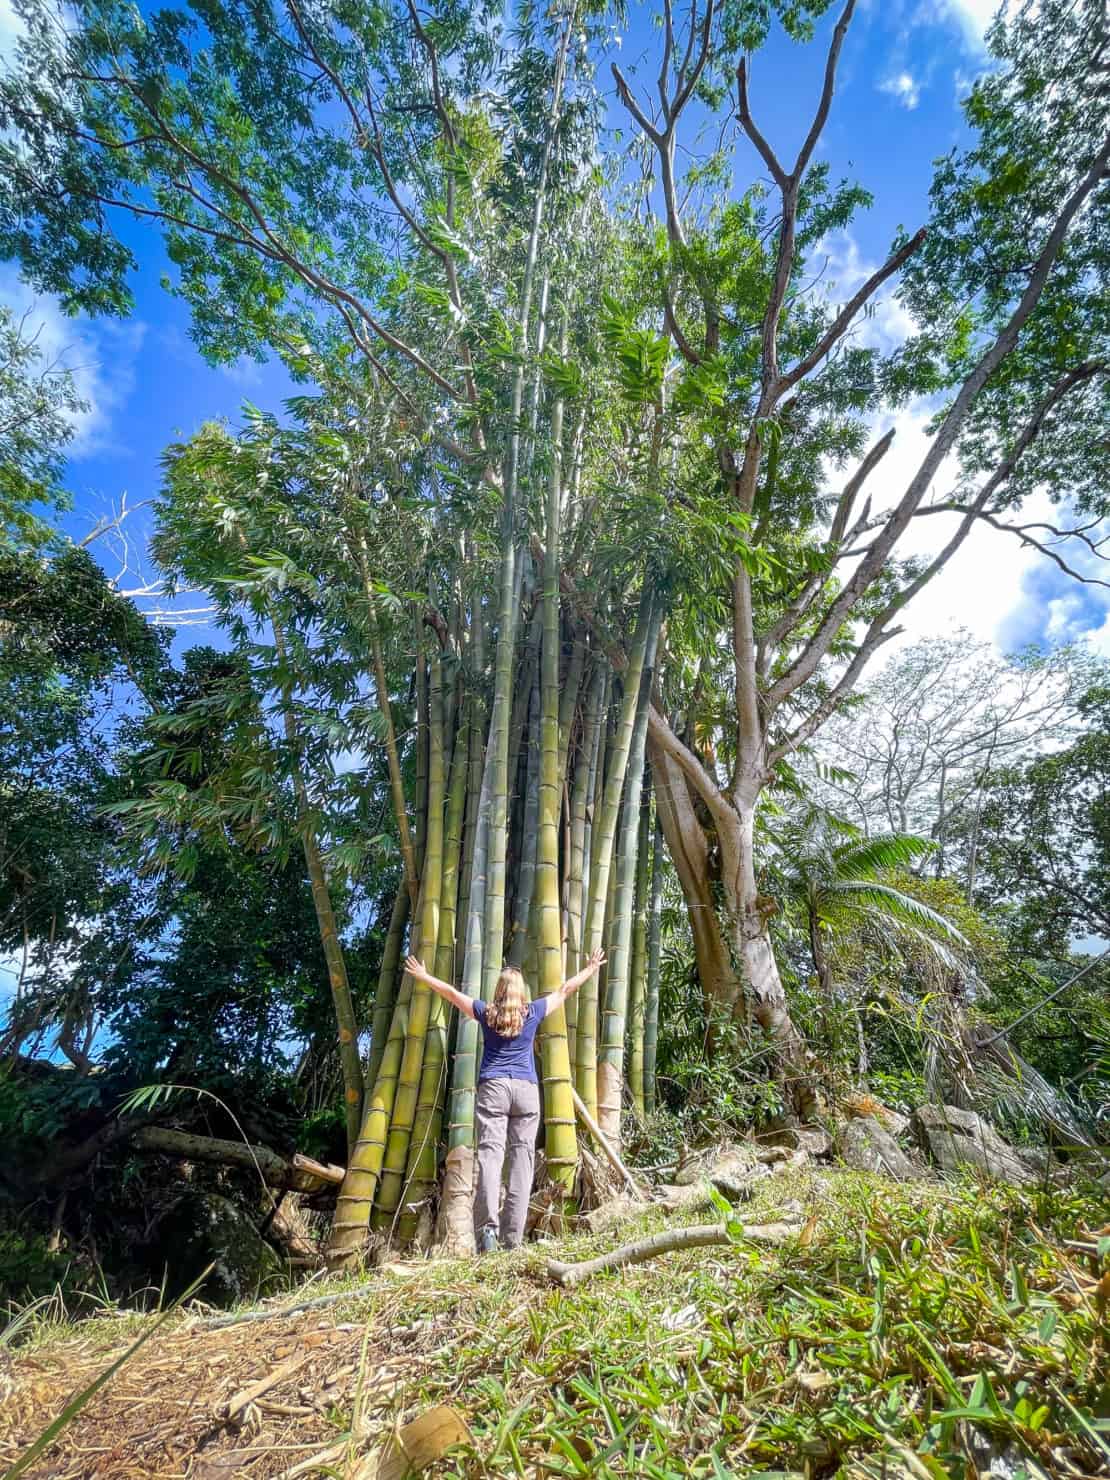 Abigail King reaching up to bamboo in Mauritius